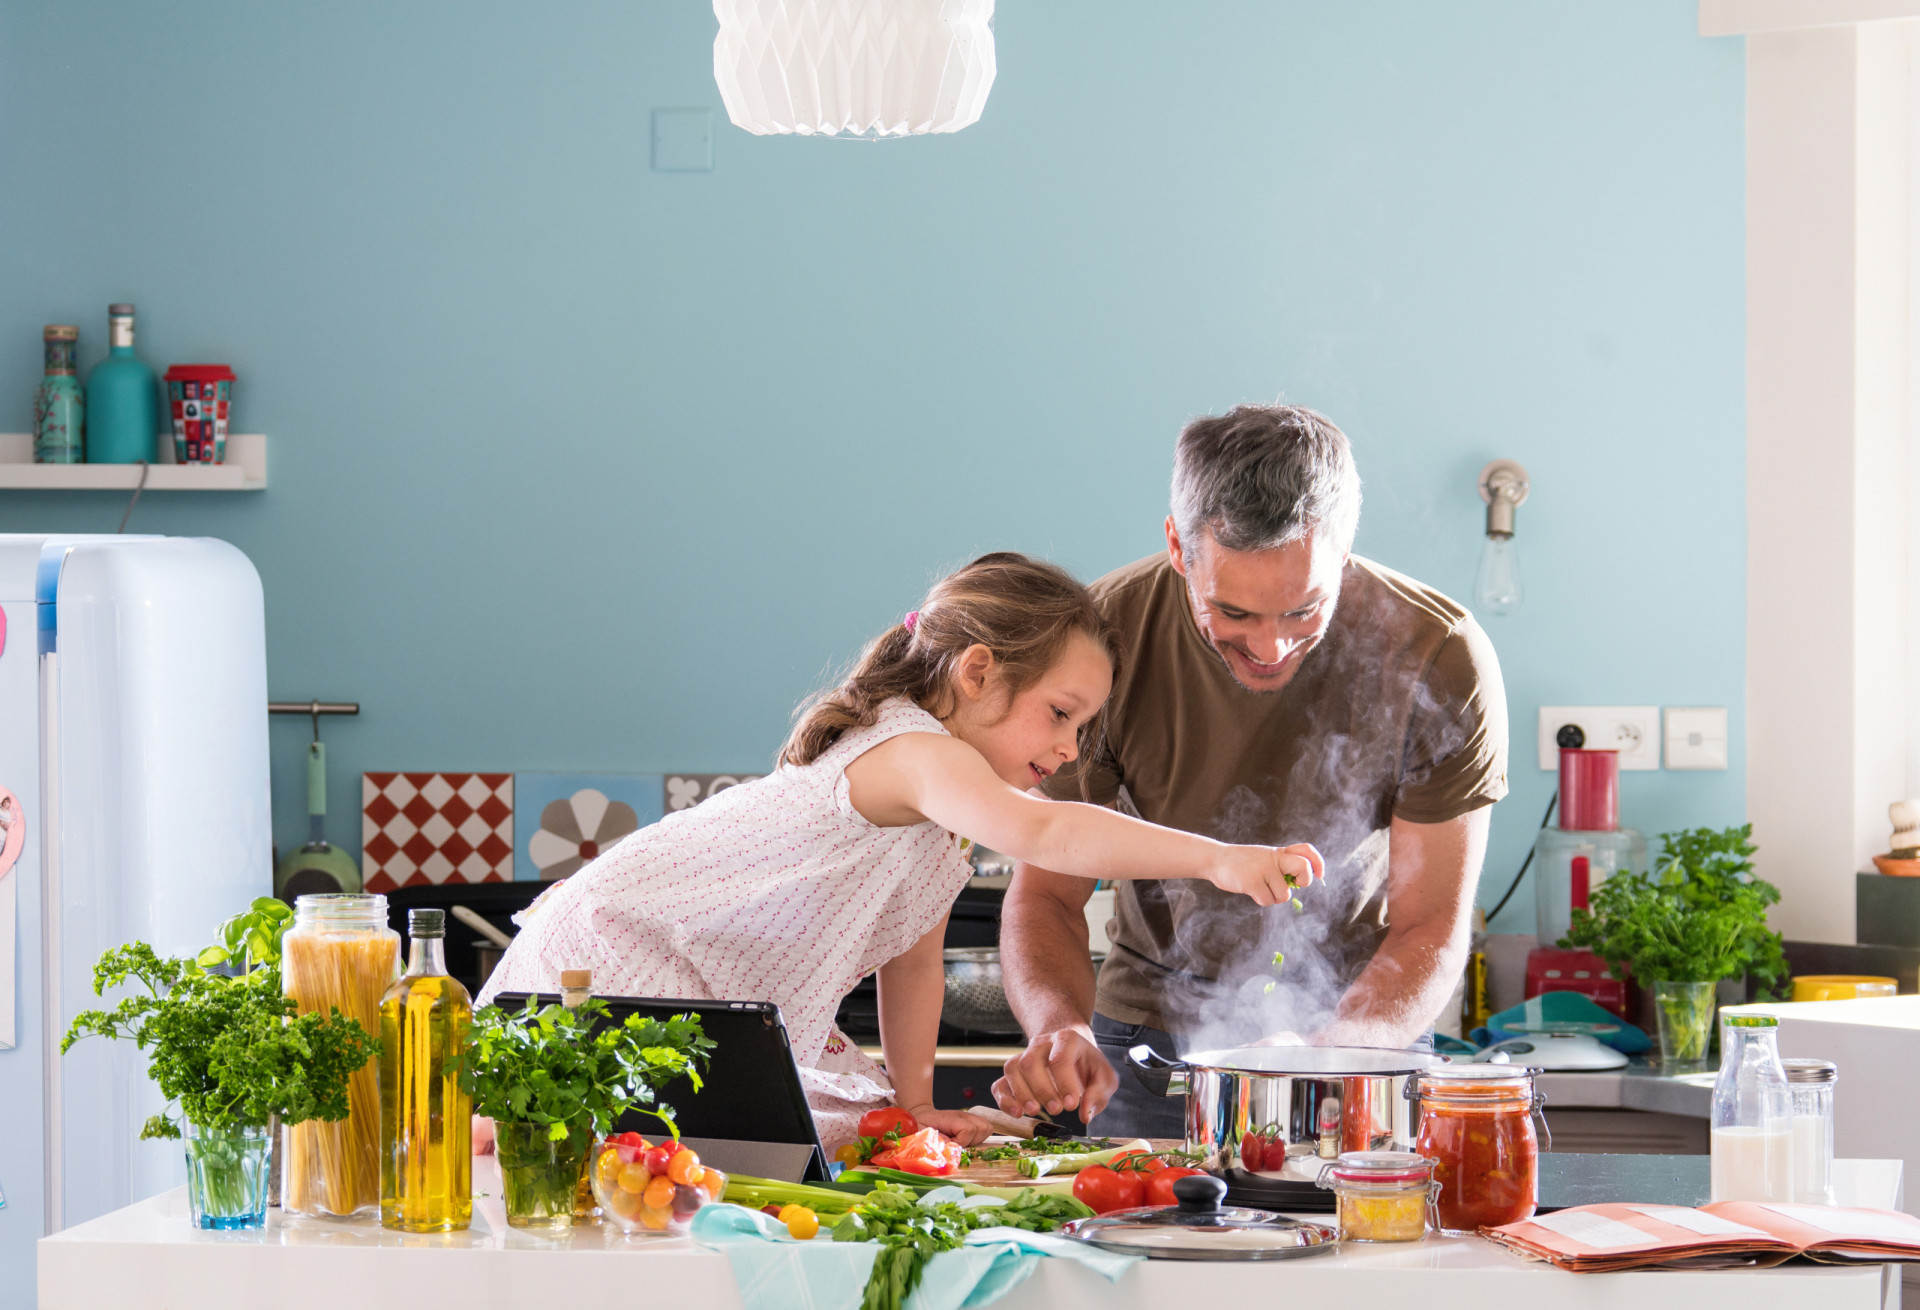 <p>Making a meal from leftovers, entertaining children, or devising a new business plan are all examples of creativity in action in practical, day-to-day life ways.</p><p><a href="https://www.msn.com/en-in/community/channel/vid-7xx8mnucu55yw63we9va2gwr7uihbxwc68fxqp25x6tg4ftibpra?cvid=94631541bc0f4f89bfd59158d696ad7e">Follow us and access great exclusive content every day</a></p>